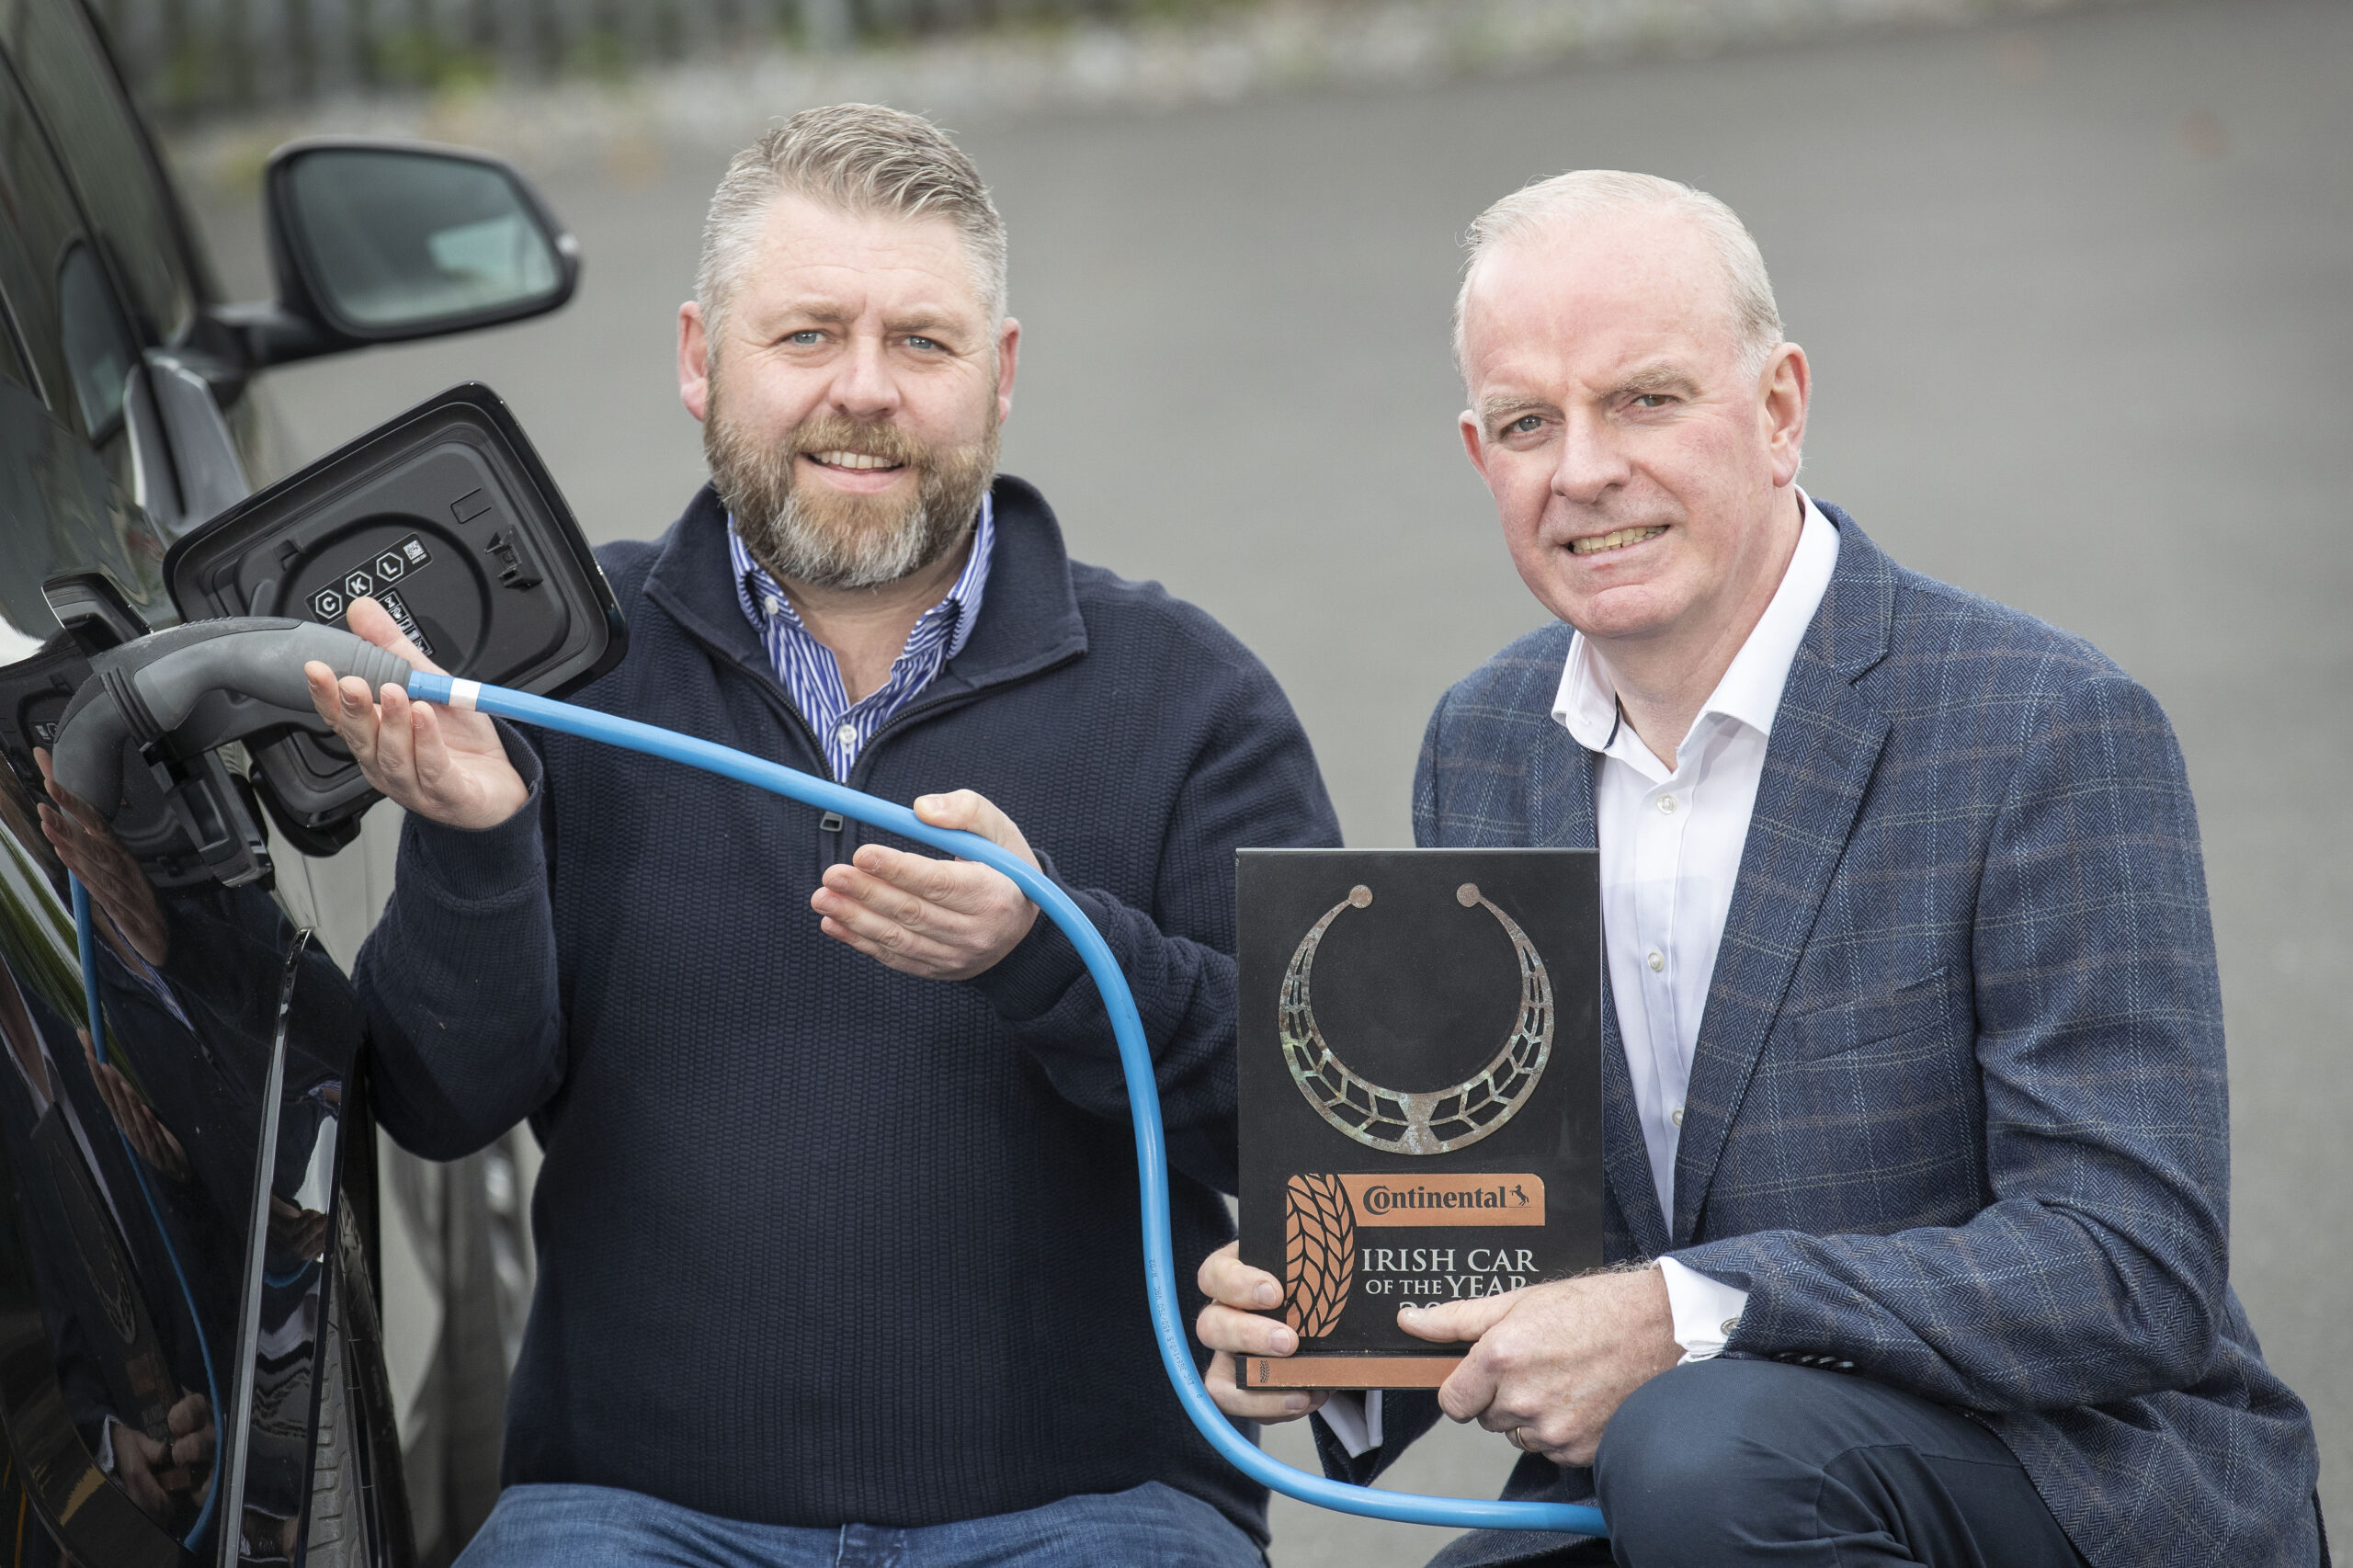 Start your engines! 37 shortlisted cars in the running for 2023 Irish Car of the Year crown